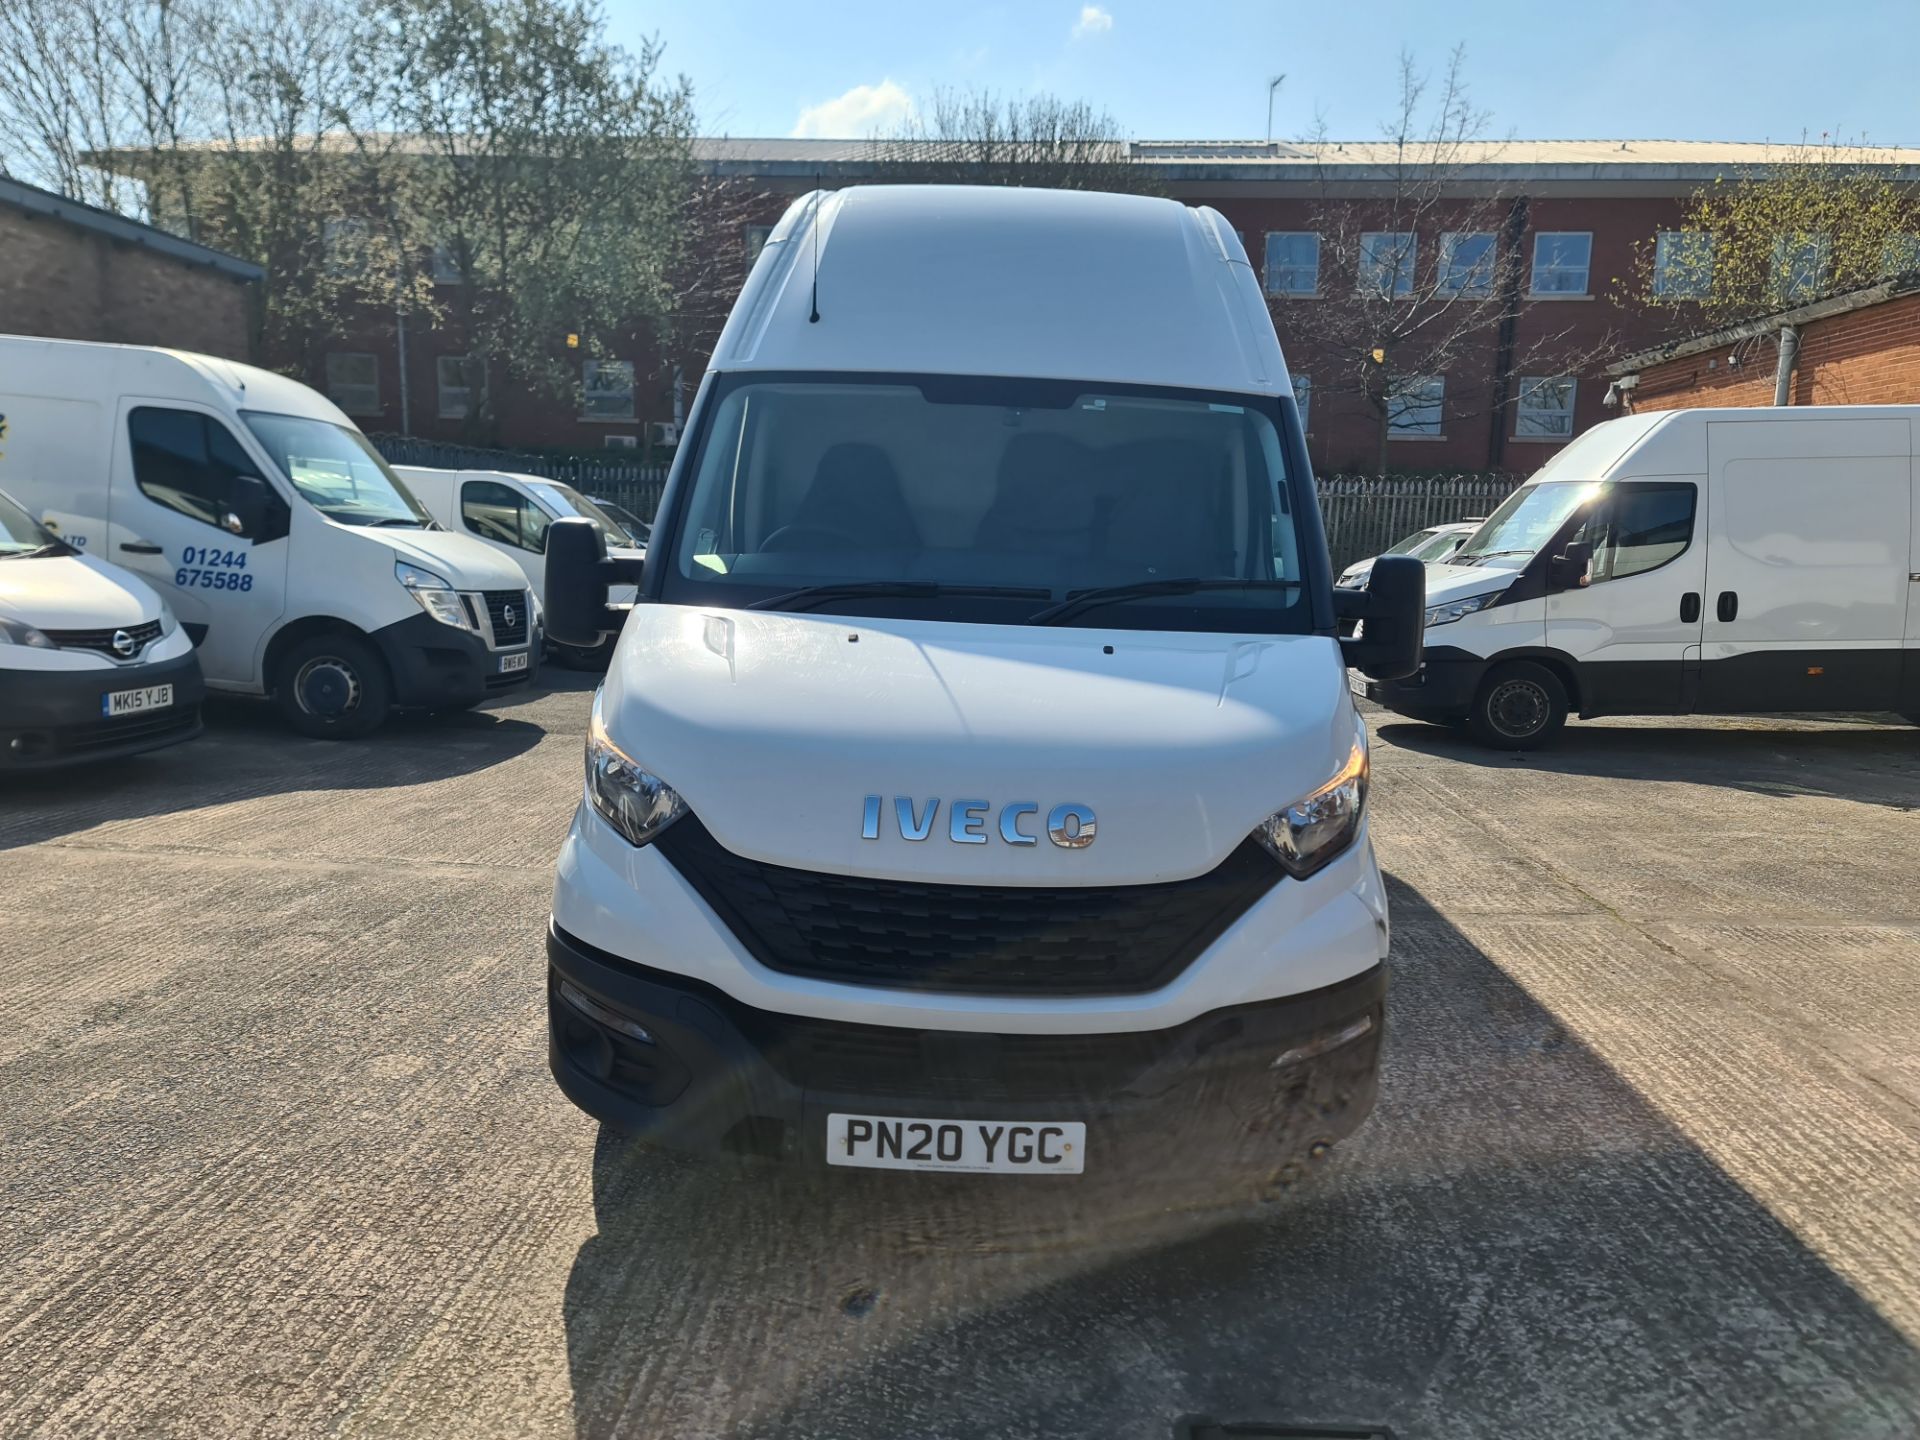 2020 Iveco Daily LWB high roof panel van - Image 2 of 21